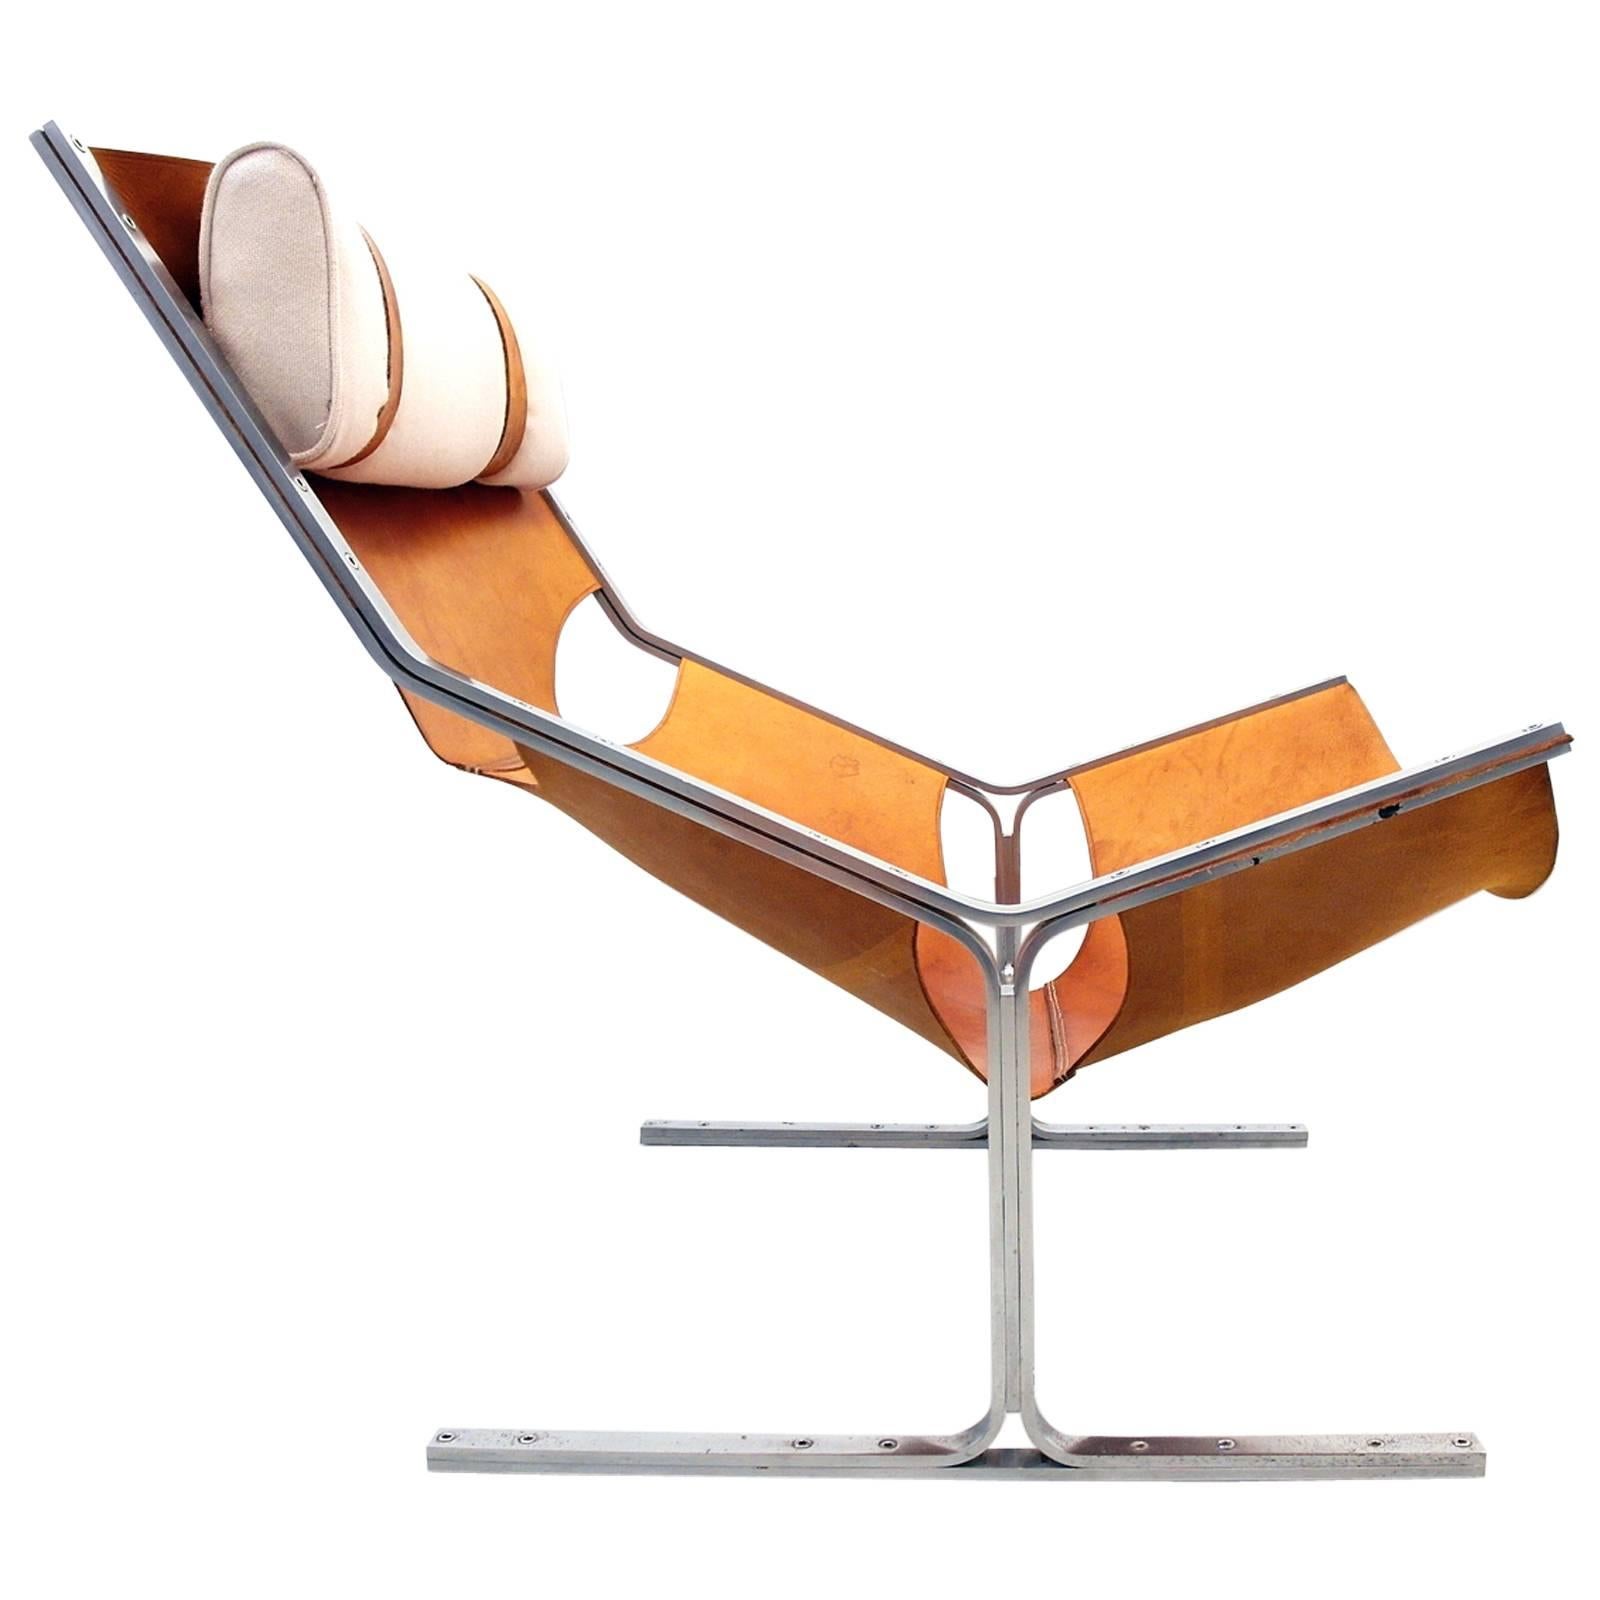 Leather and Brushed Steel Lounge Chair by Polak, Netherlands, circa 1958